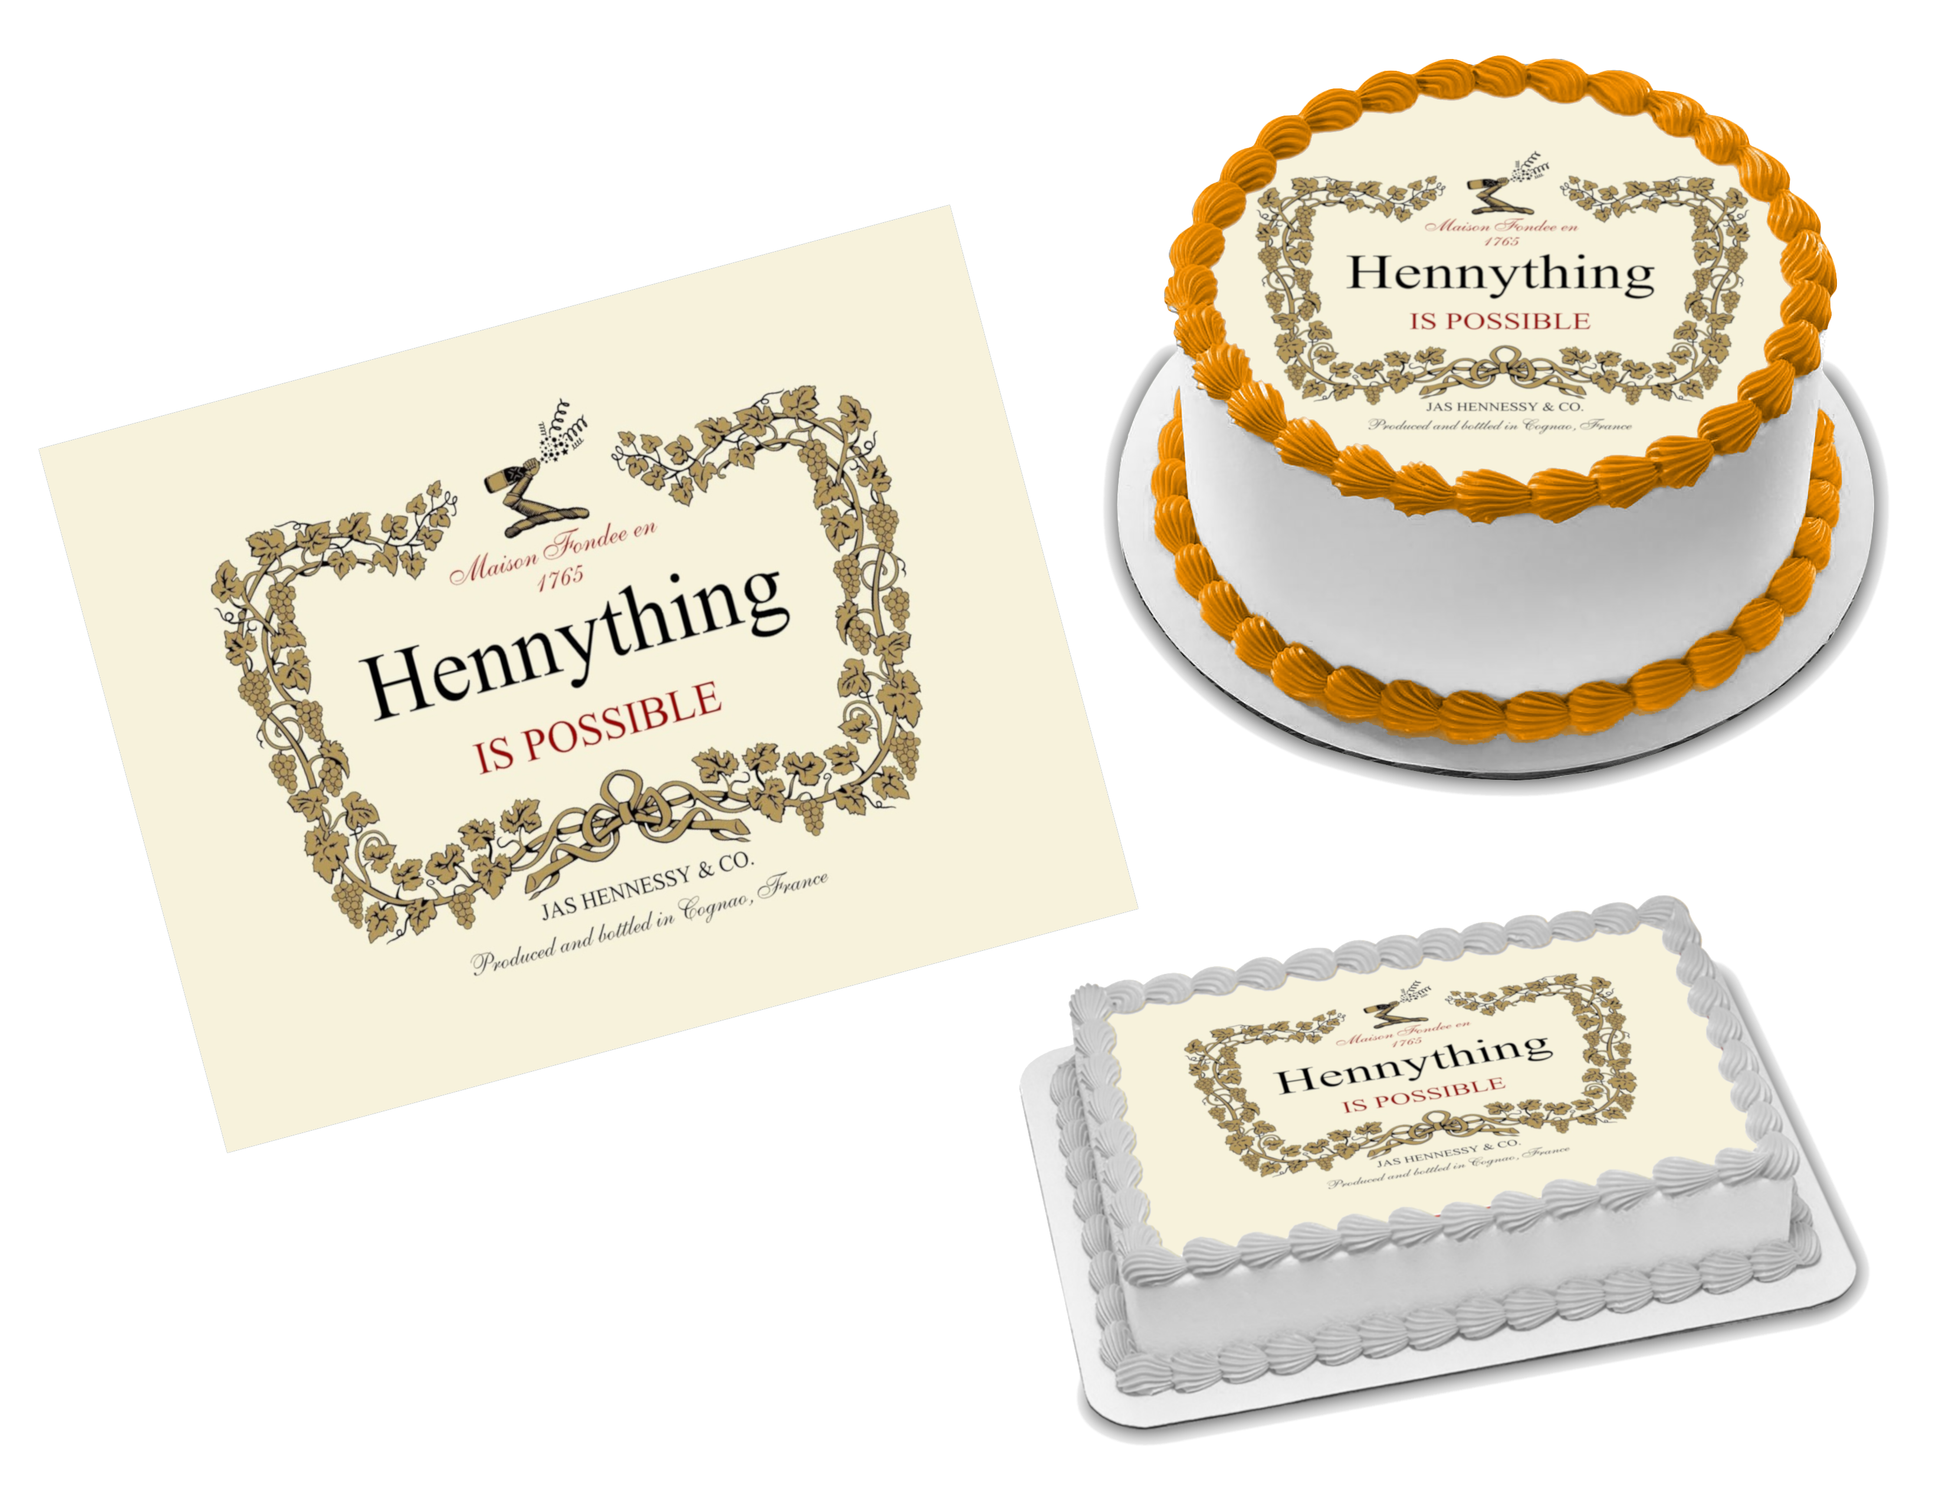 Hennessy Hennything is Possible Edible Image Frosting Sheet #16